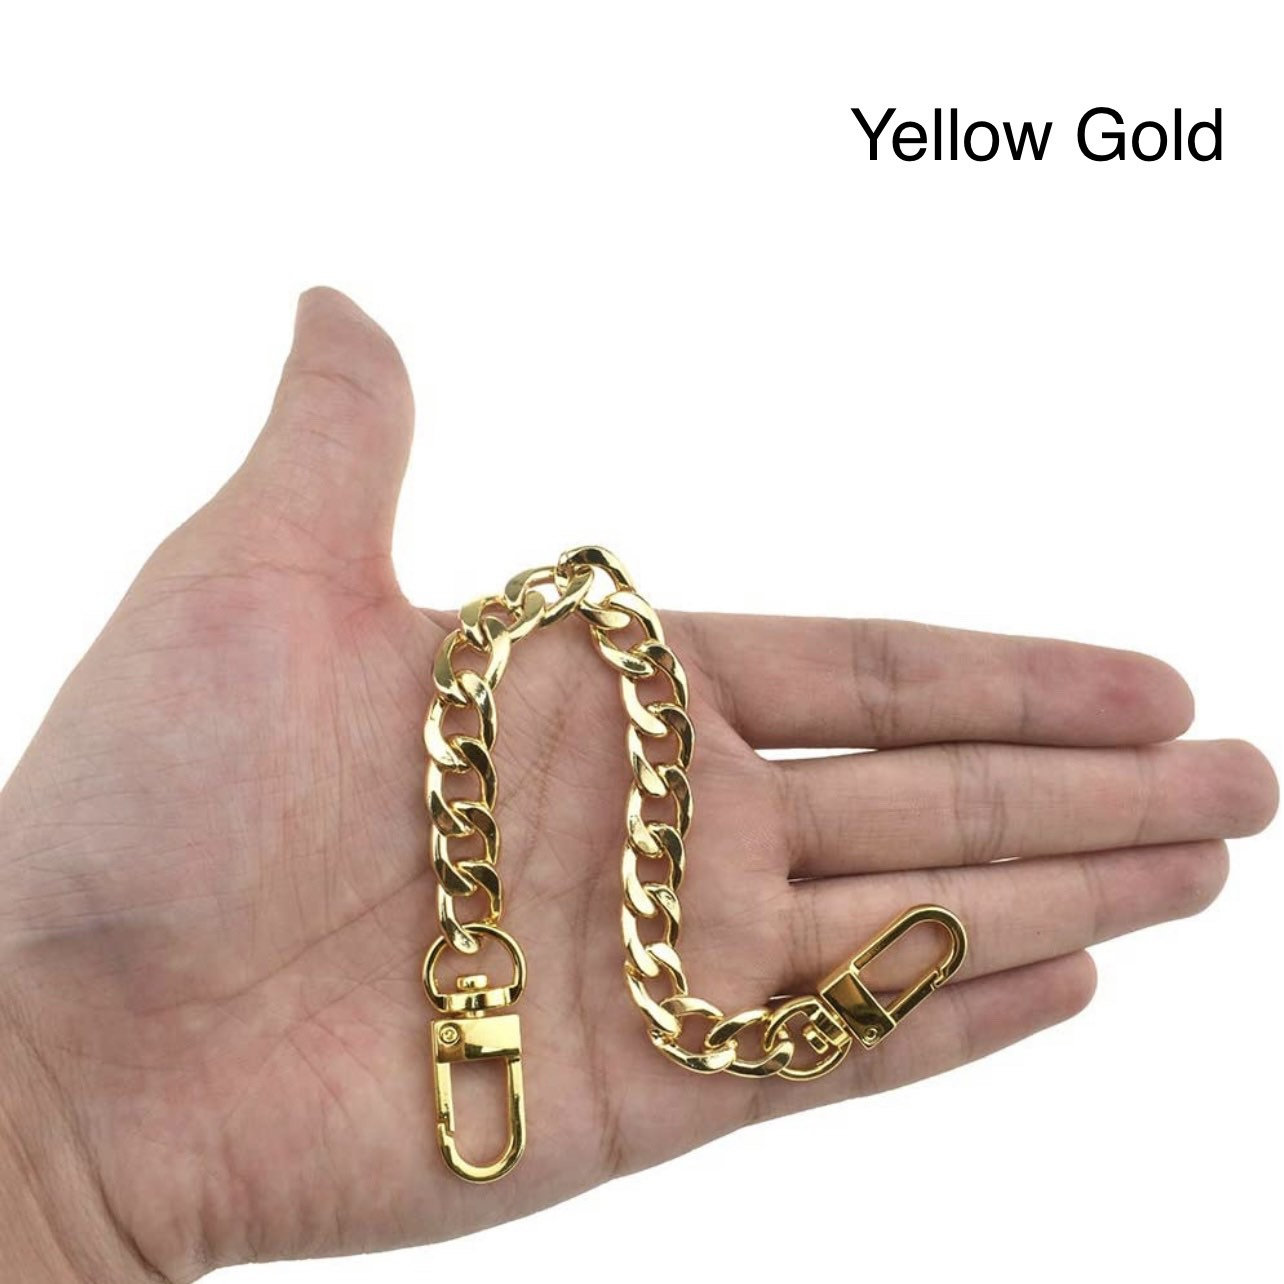 Louis Vuitton M61095 Gold tone ID LV Chain Ring Women Used Japan